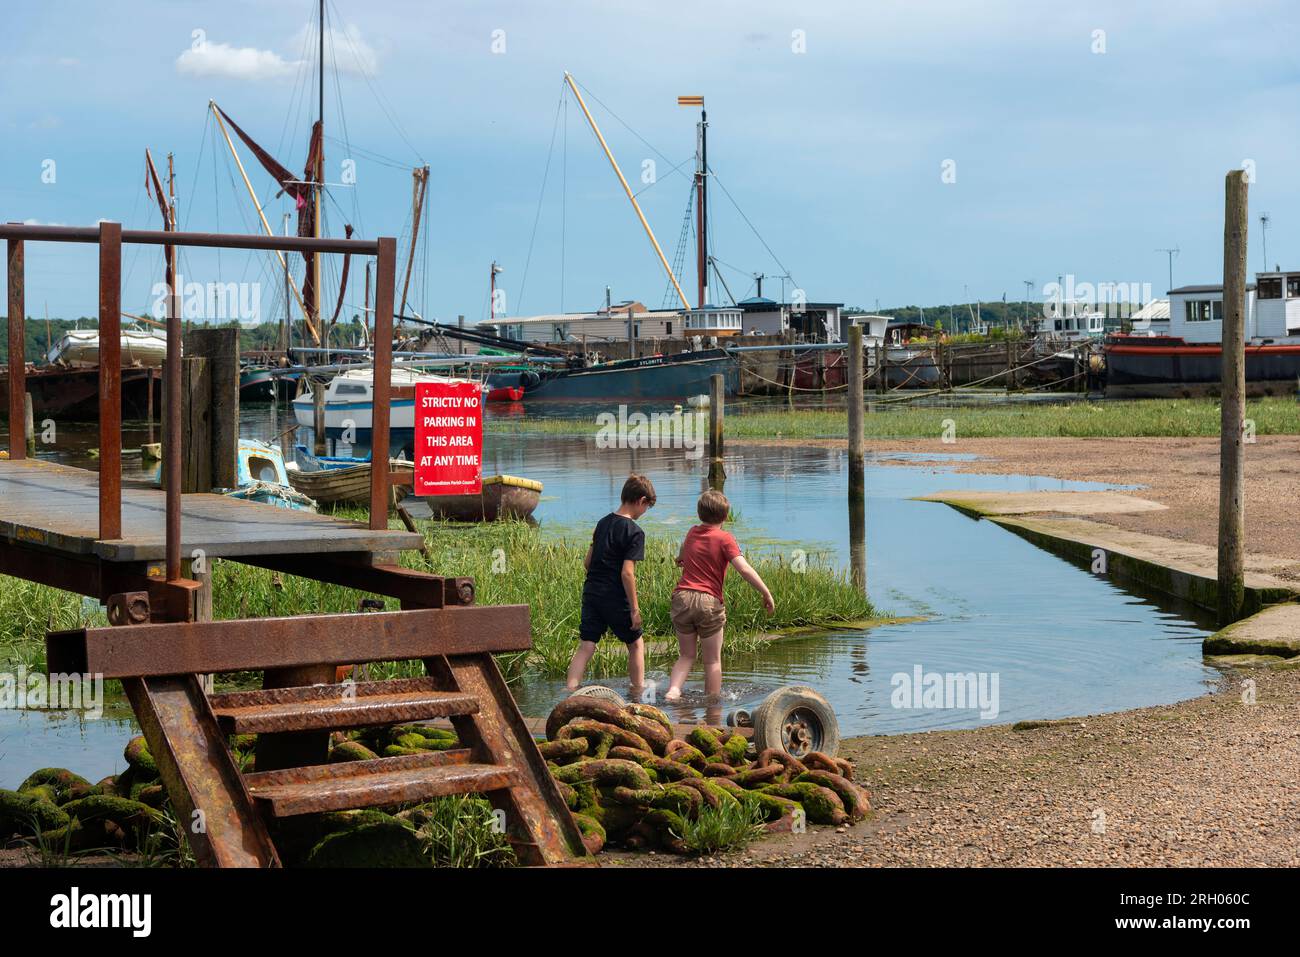 Two boys in summer 2023 playing in the water on an incoming tide in the picturesque waterside village of Pin Mill, Suffolk, East Anglia, England Stock Photo